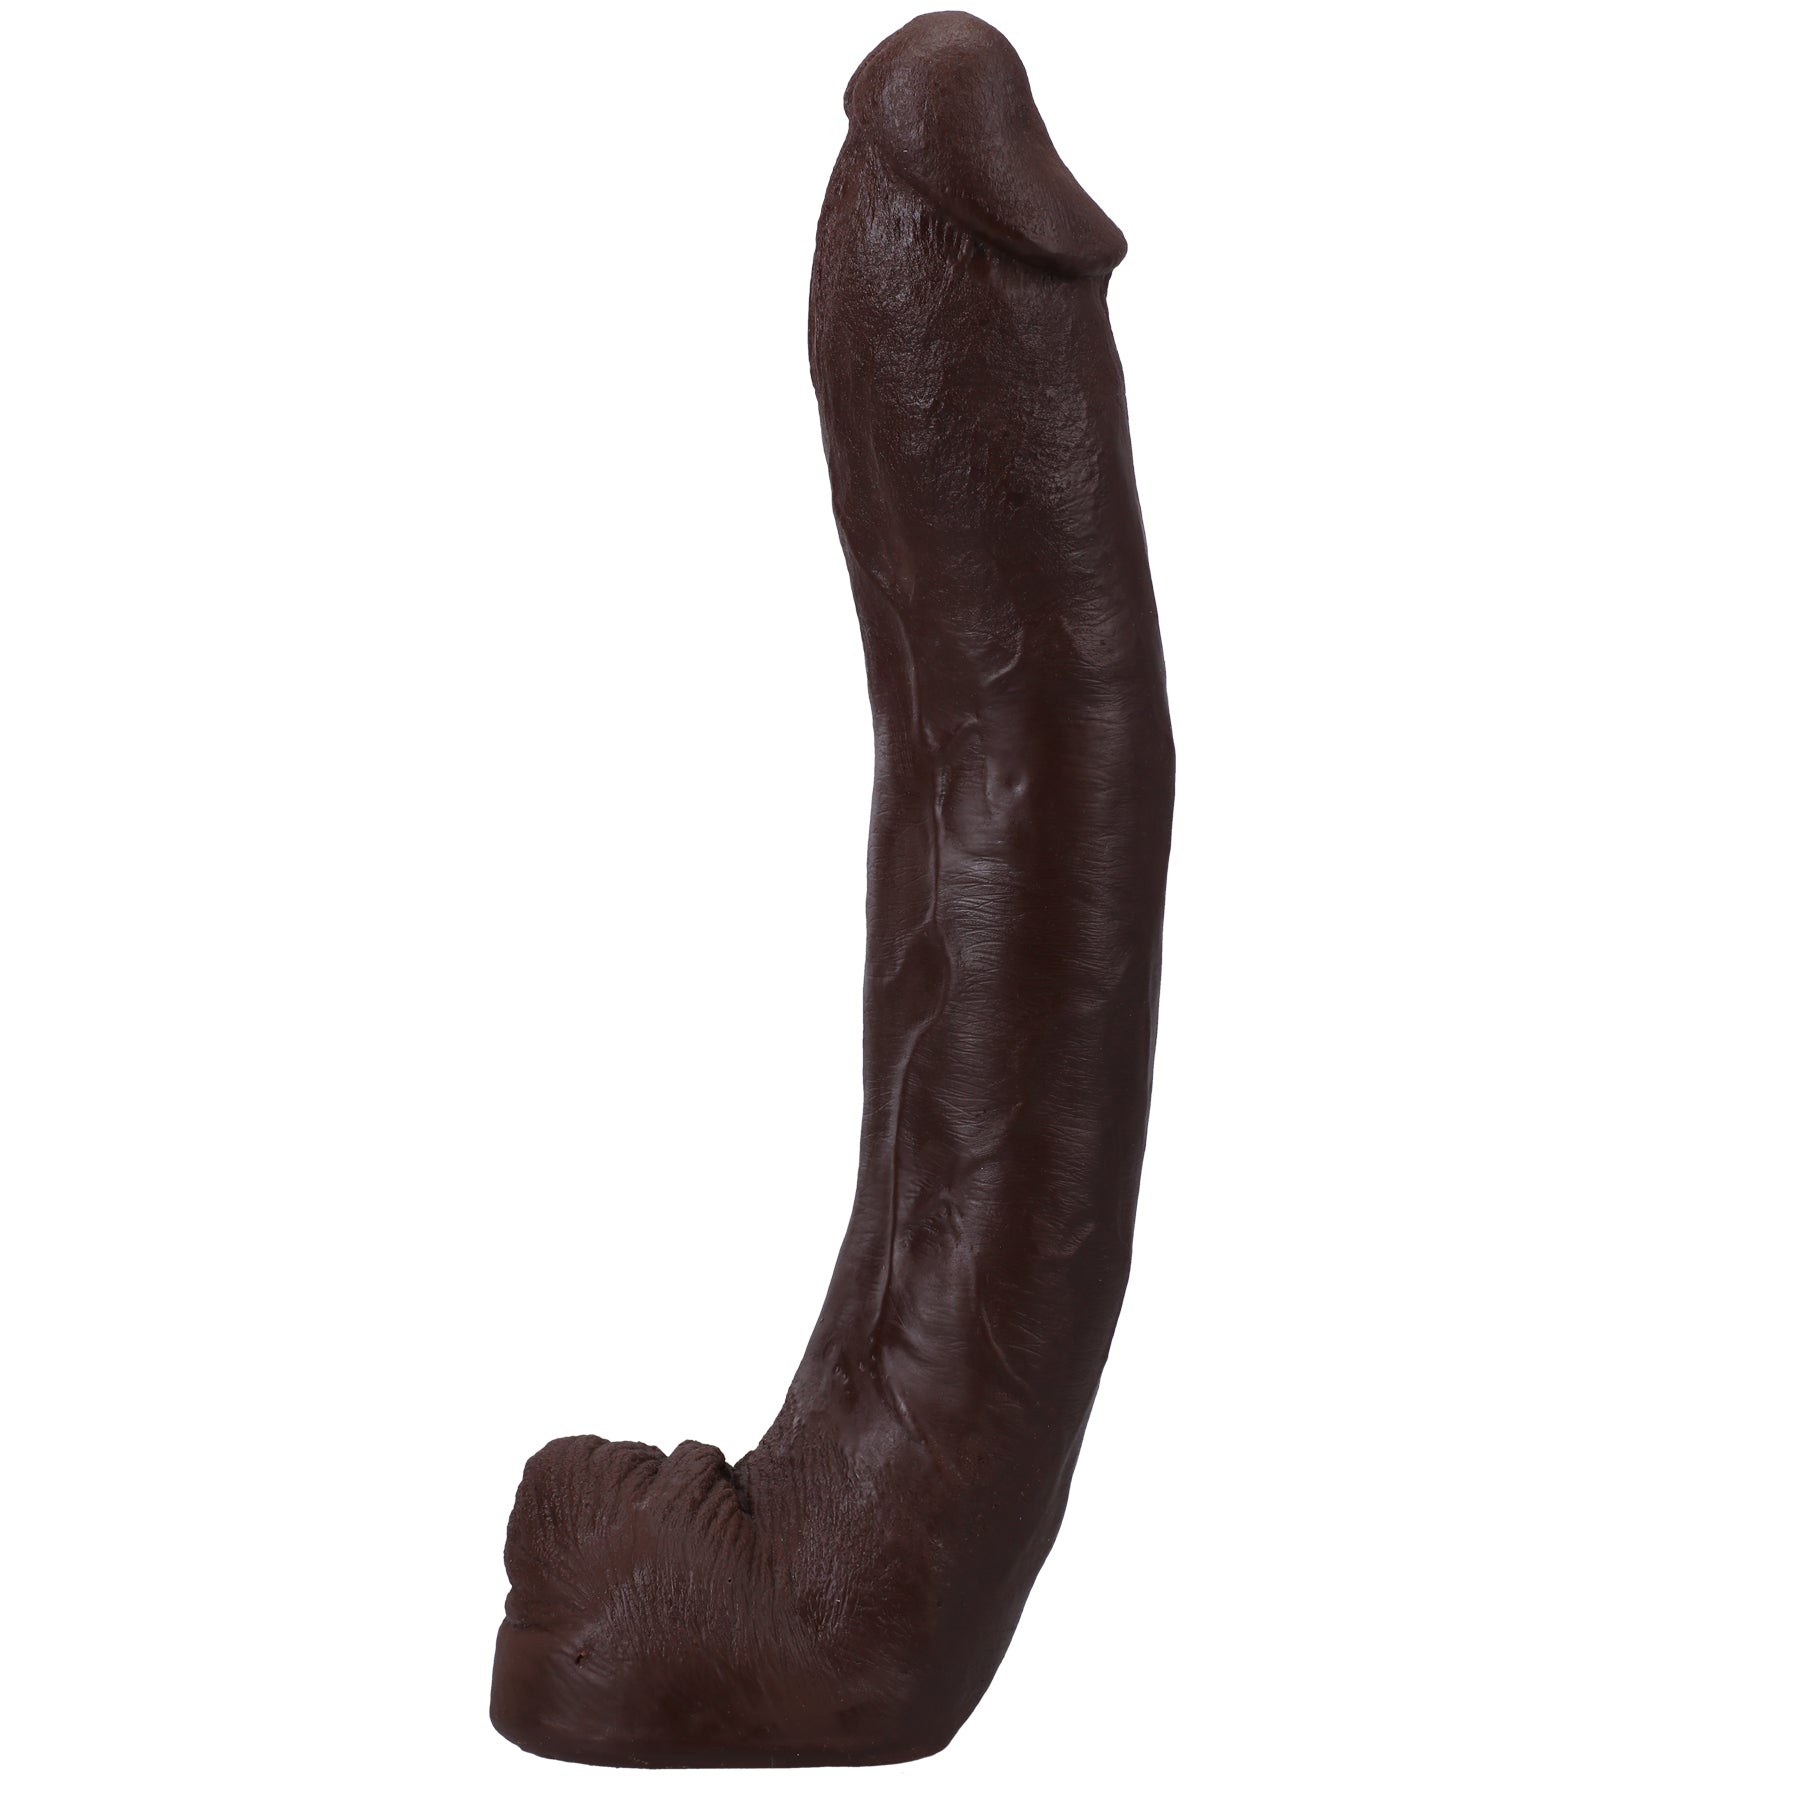 Signature Cocks - Dredd - 13.5 Inch Ultraskyn Cock With Removable Vac-U-Lock Suction Cup - Chocolate-3